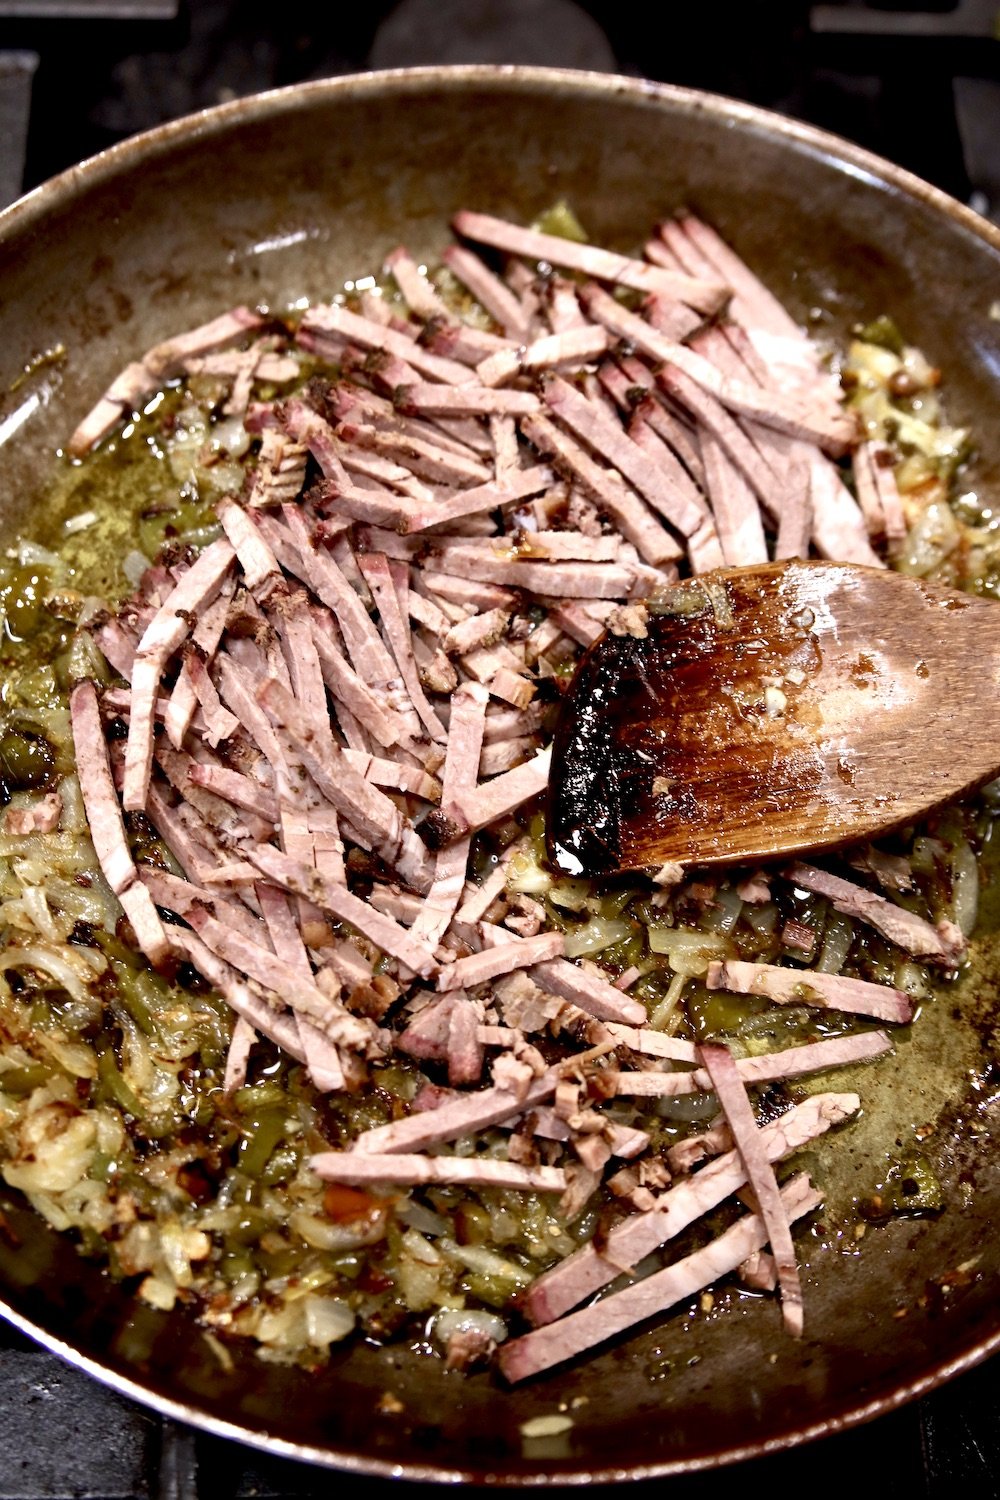 chopped brisket in a skillet with pepper and onions. Wood spoon stirring.